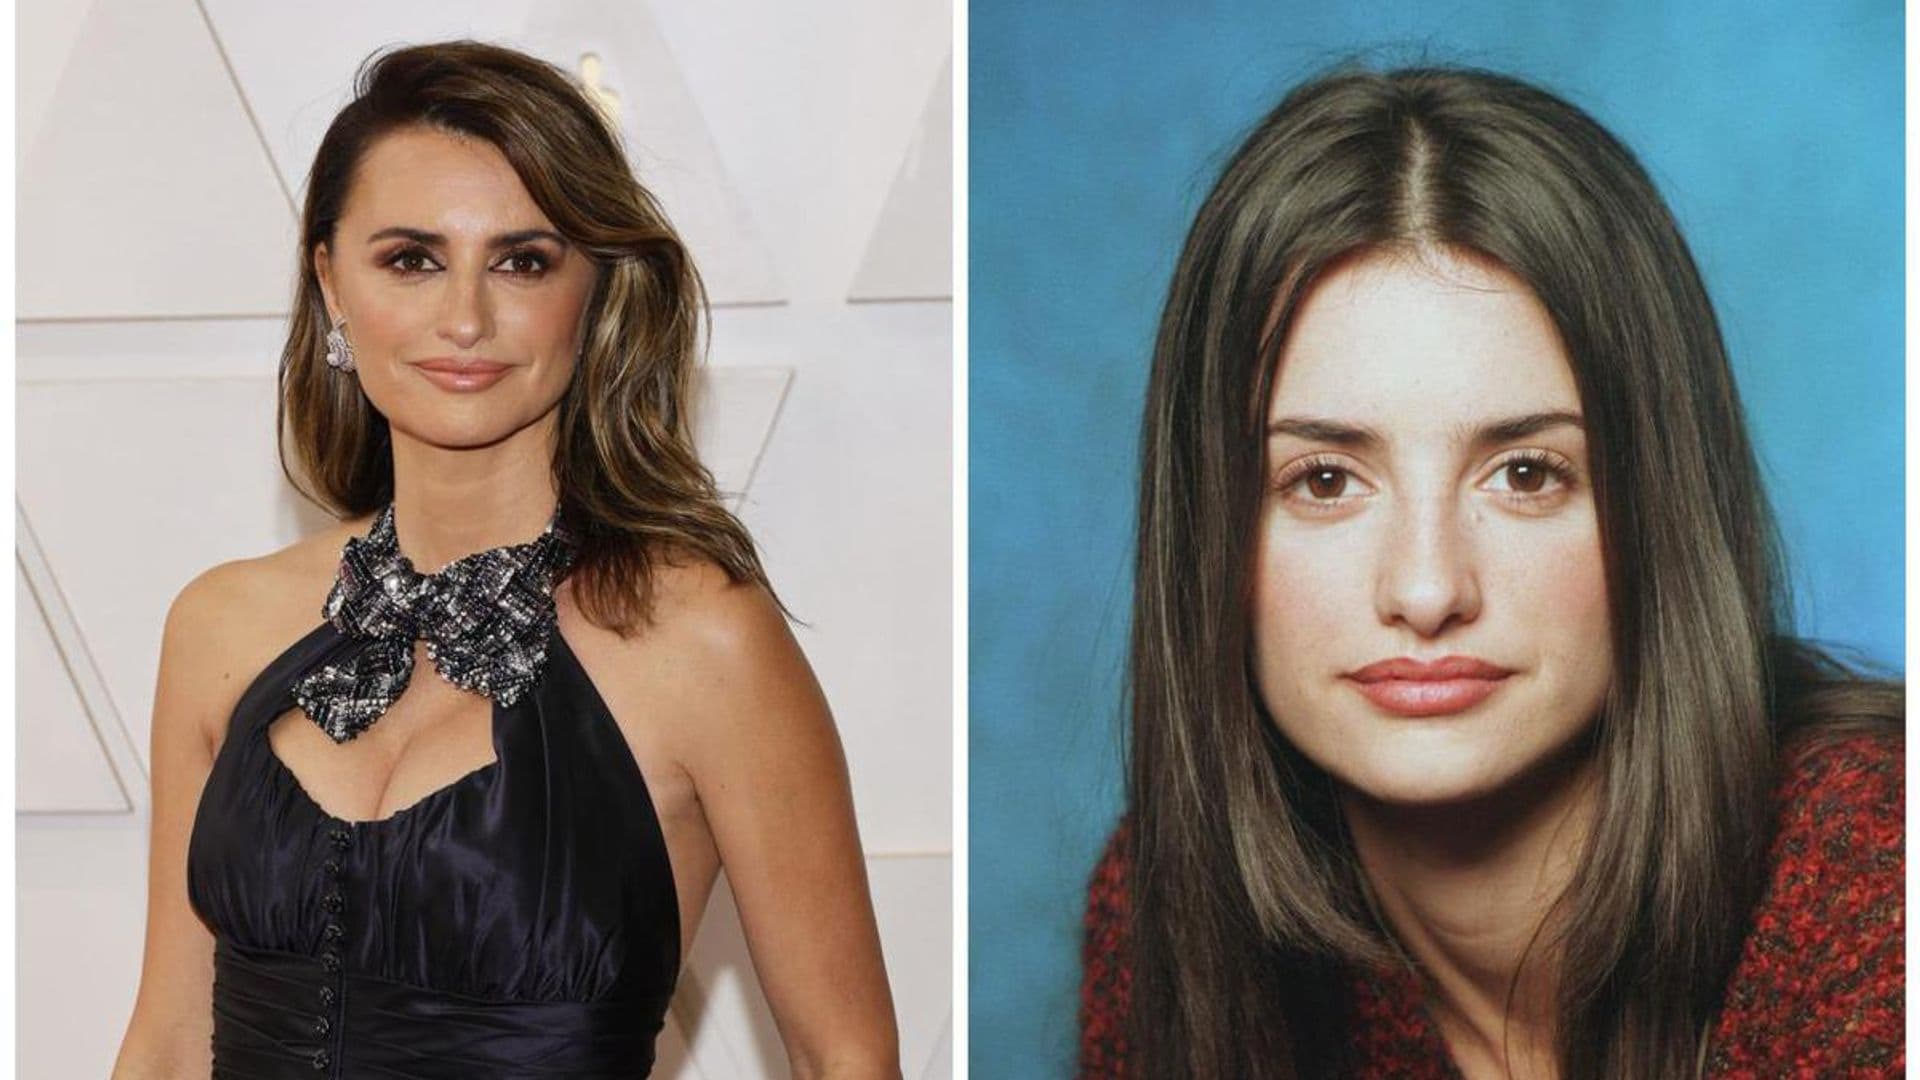 Happy Birthday, Penélope Cruz! Here are some of her most iconic movies